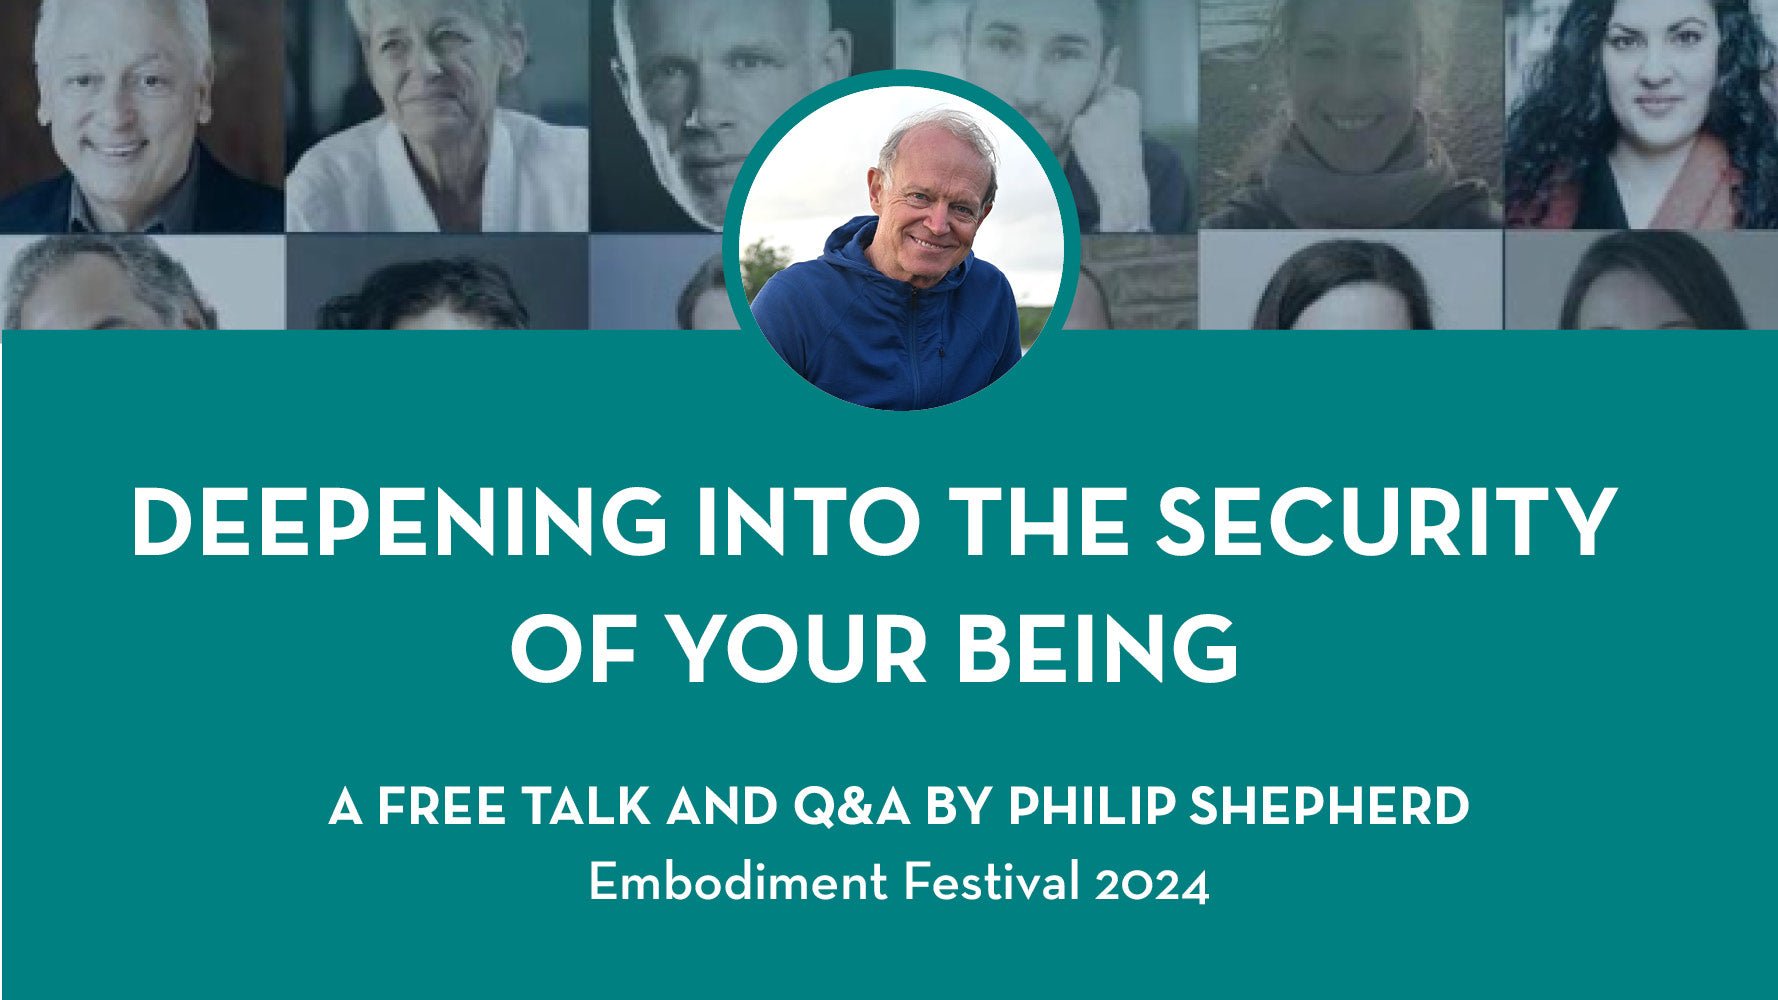 Deepening into the Security of Your Being: The Embodiment Festival 2024 free talk - The Embodied Present Process